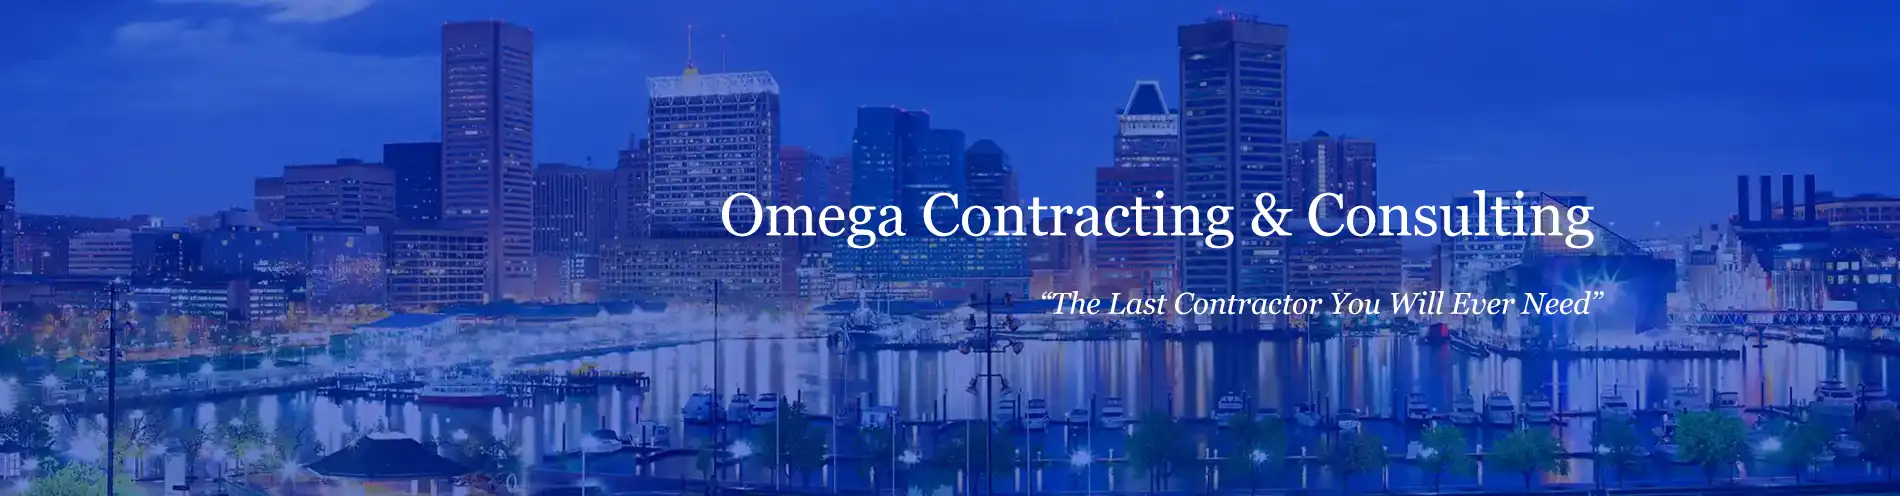 Omega Contracting & Consulting commercial construction contractors